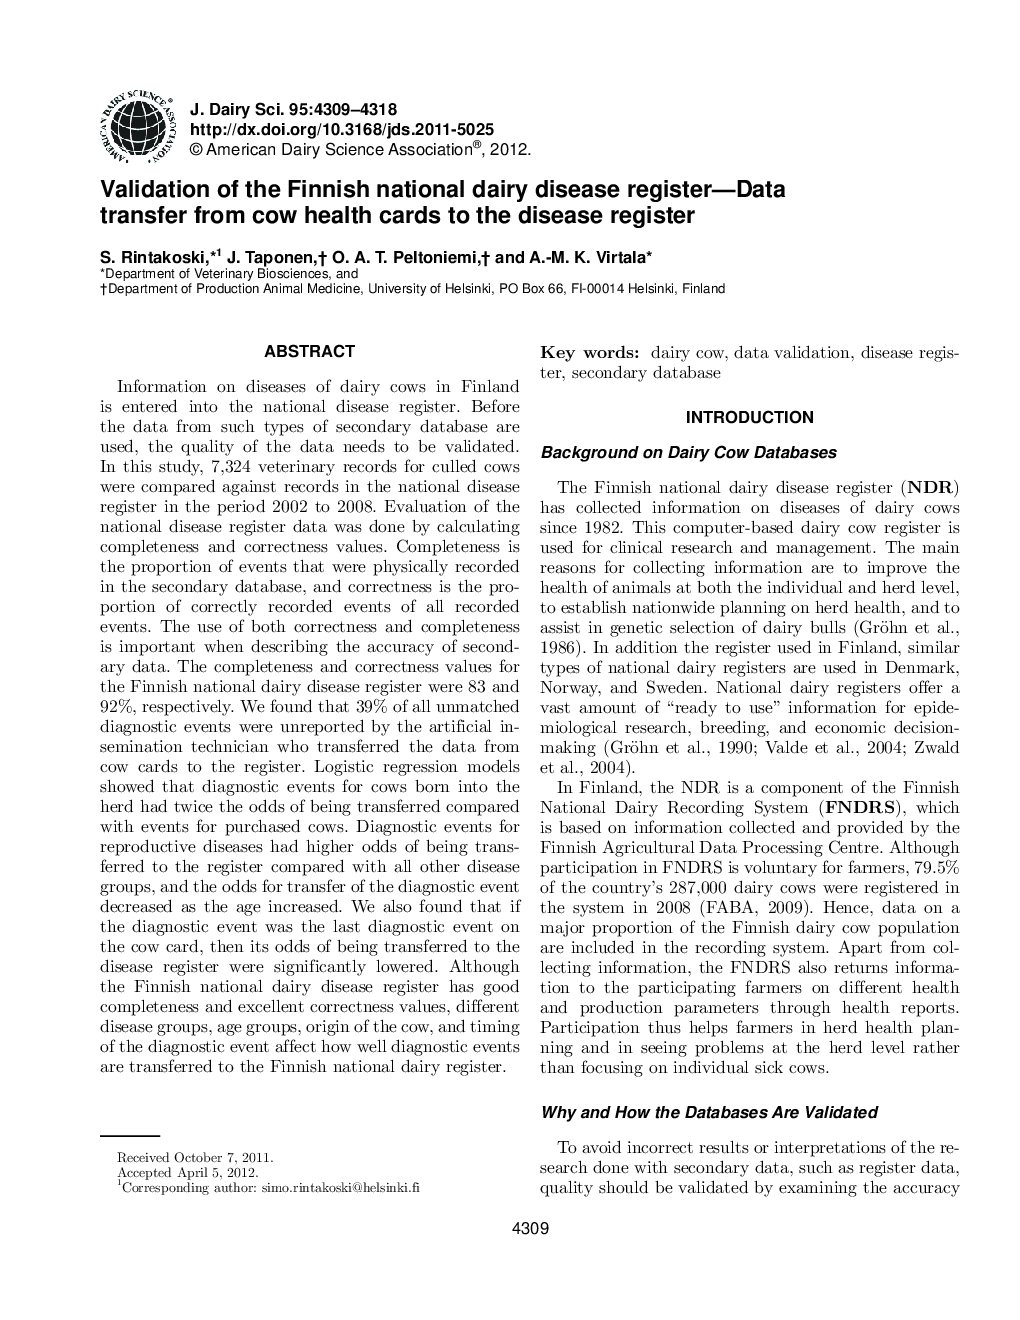 Validation of the Finnish national dairy disease register-Data transfer from cow health cards to the disease register